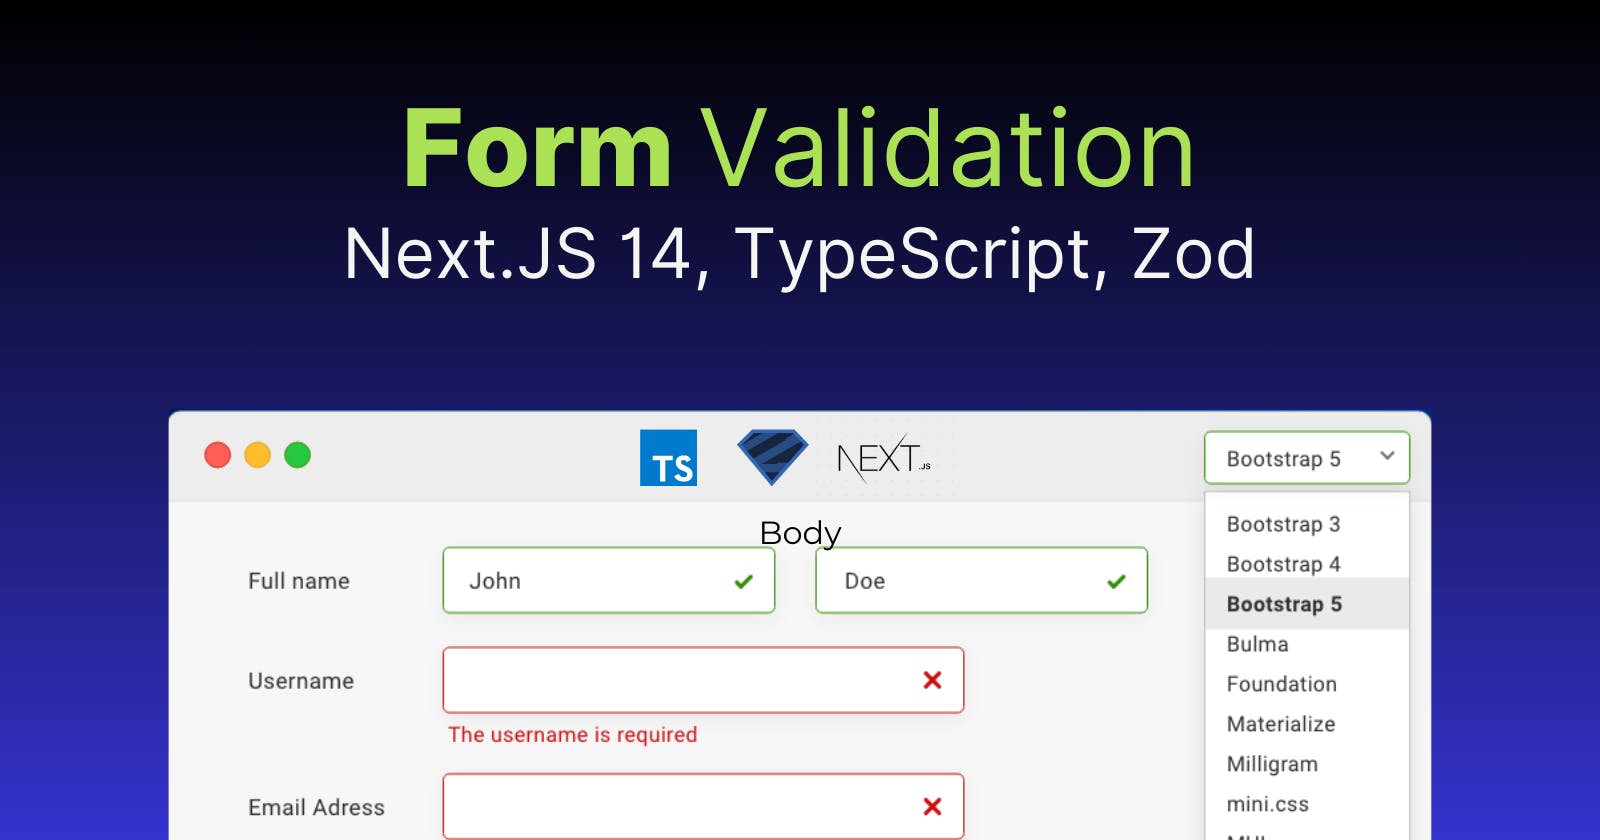 Validate forms with NextJS 14, typescript, and Zod